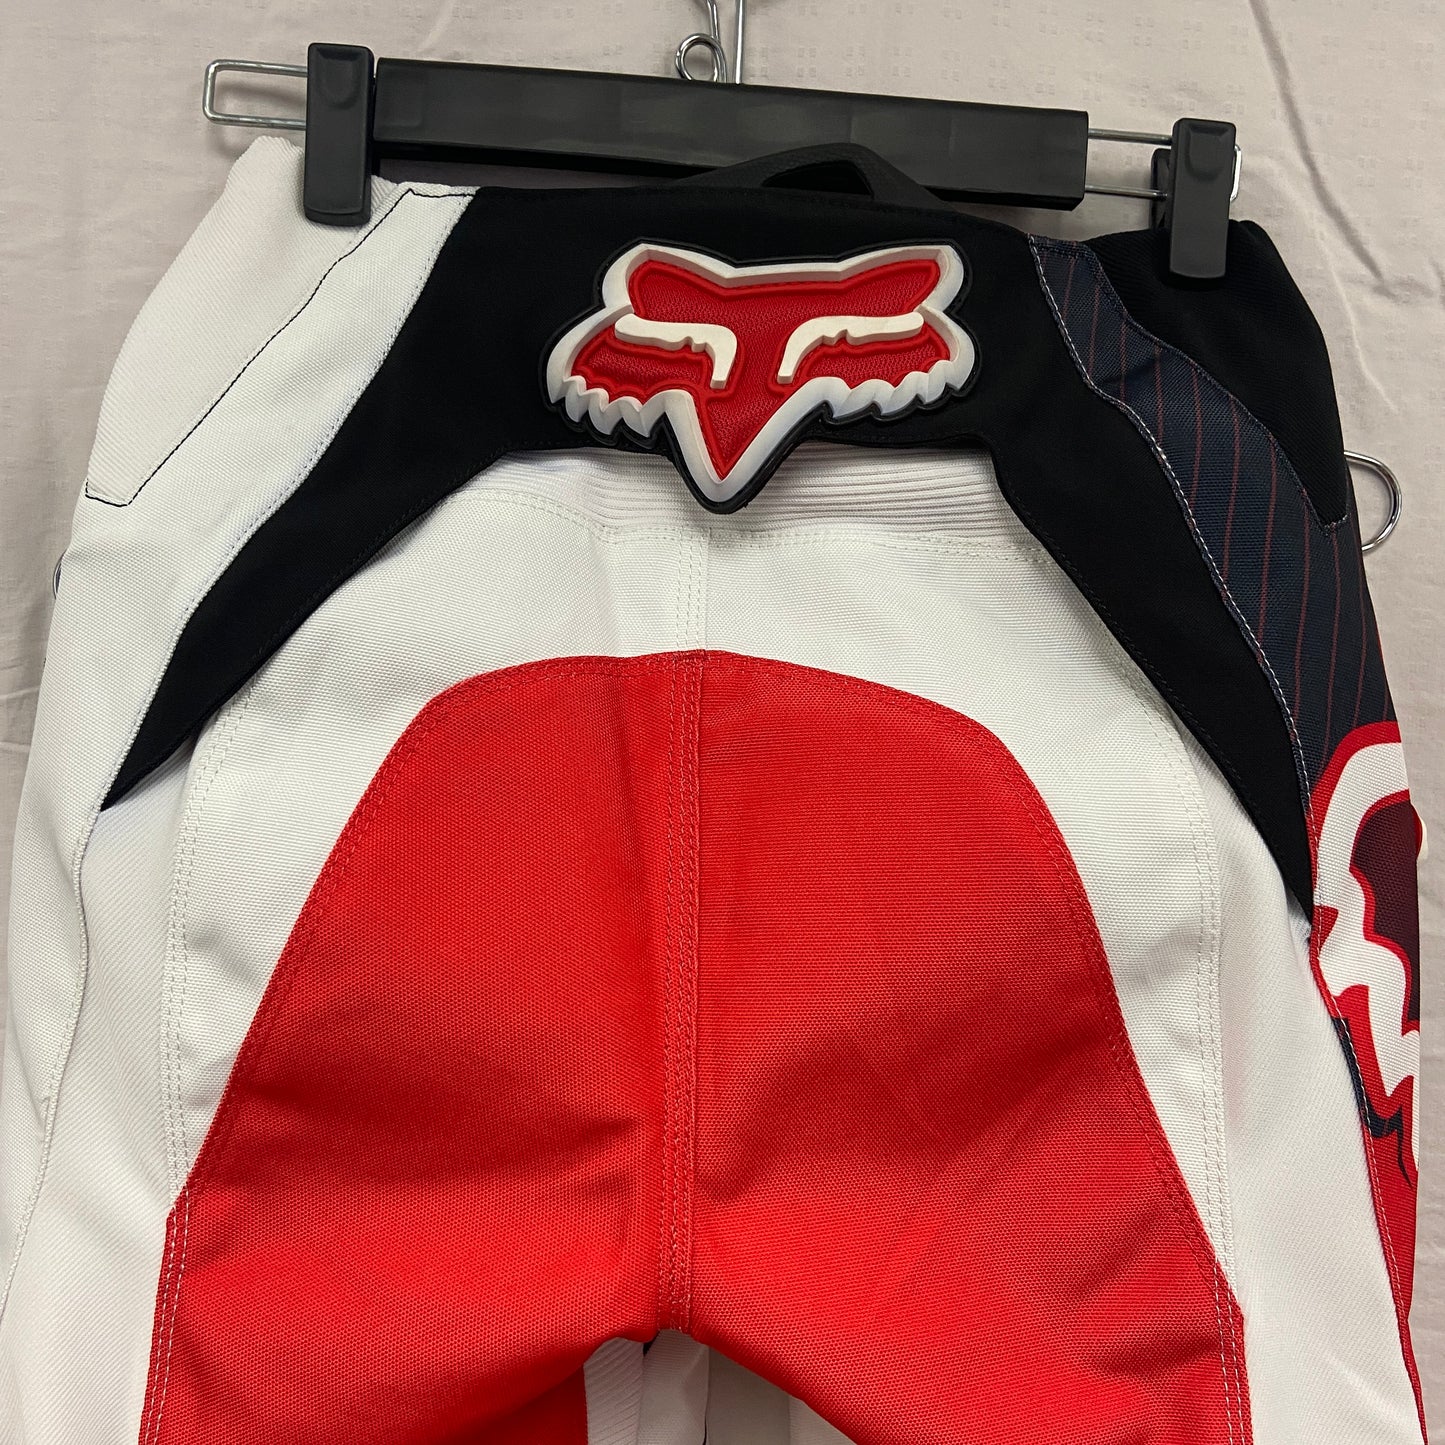 Fox Racing 360 Flight Pants Size 28 (Open Package) - ExtremeSupply.com